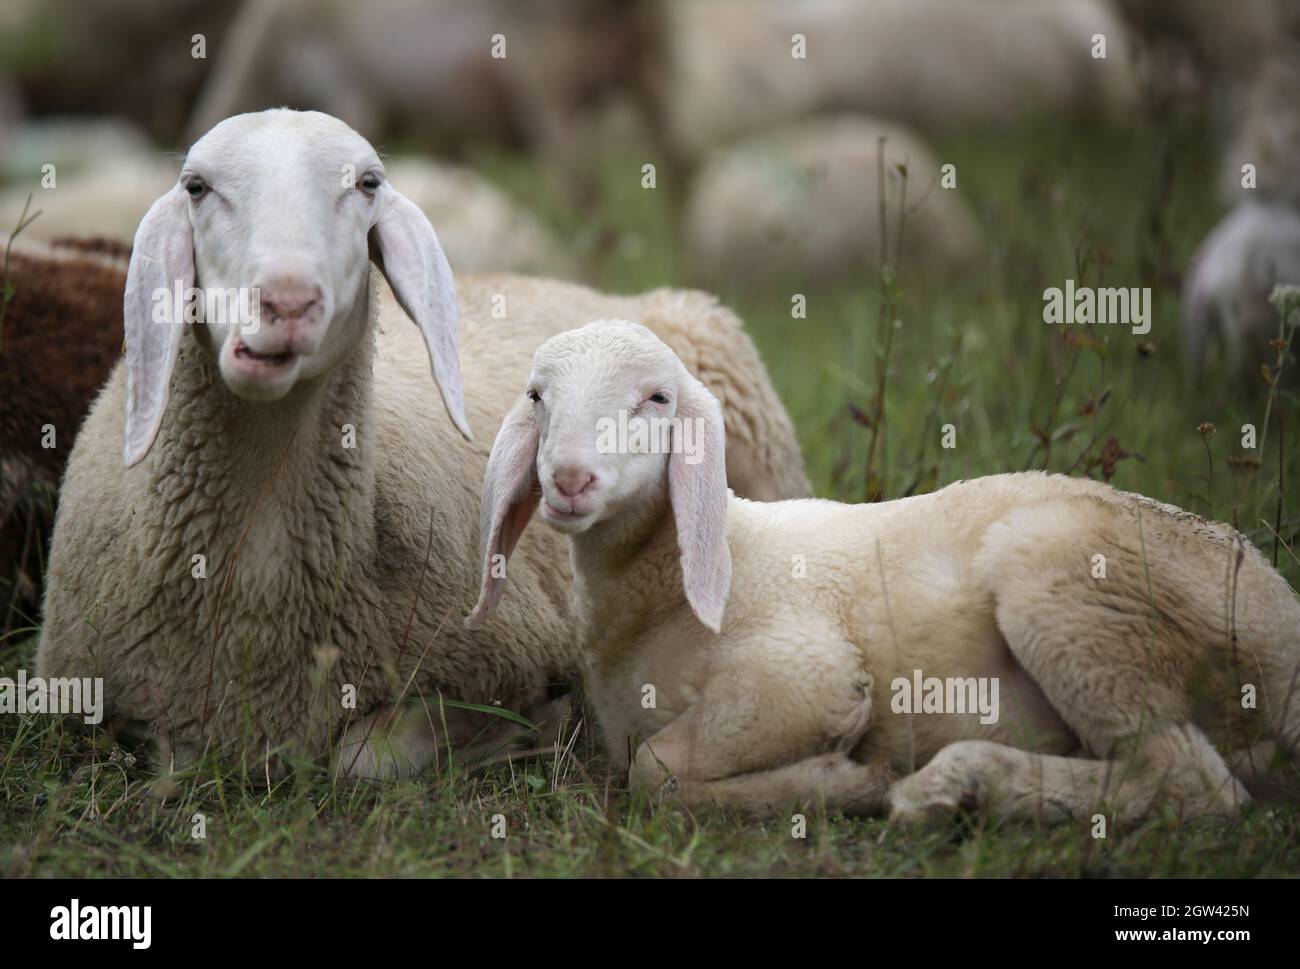 Lamb With His Mother In The Middle Of The Flock Of Sheep Stock Photo